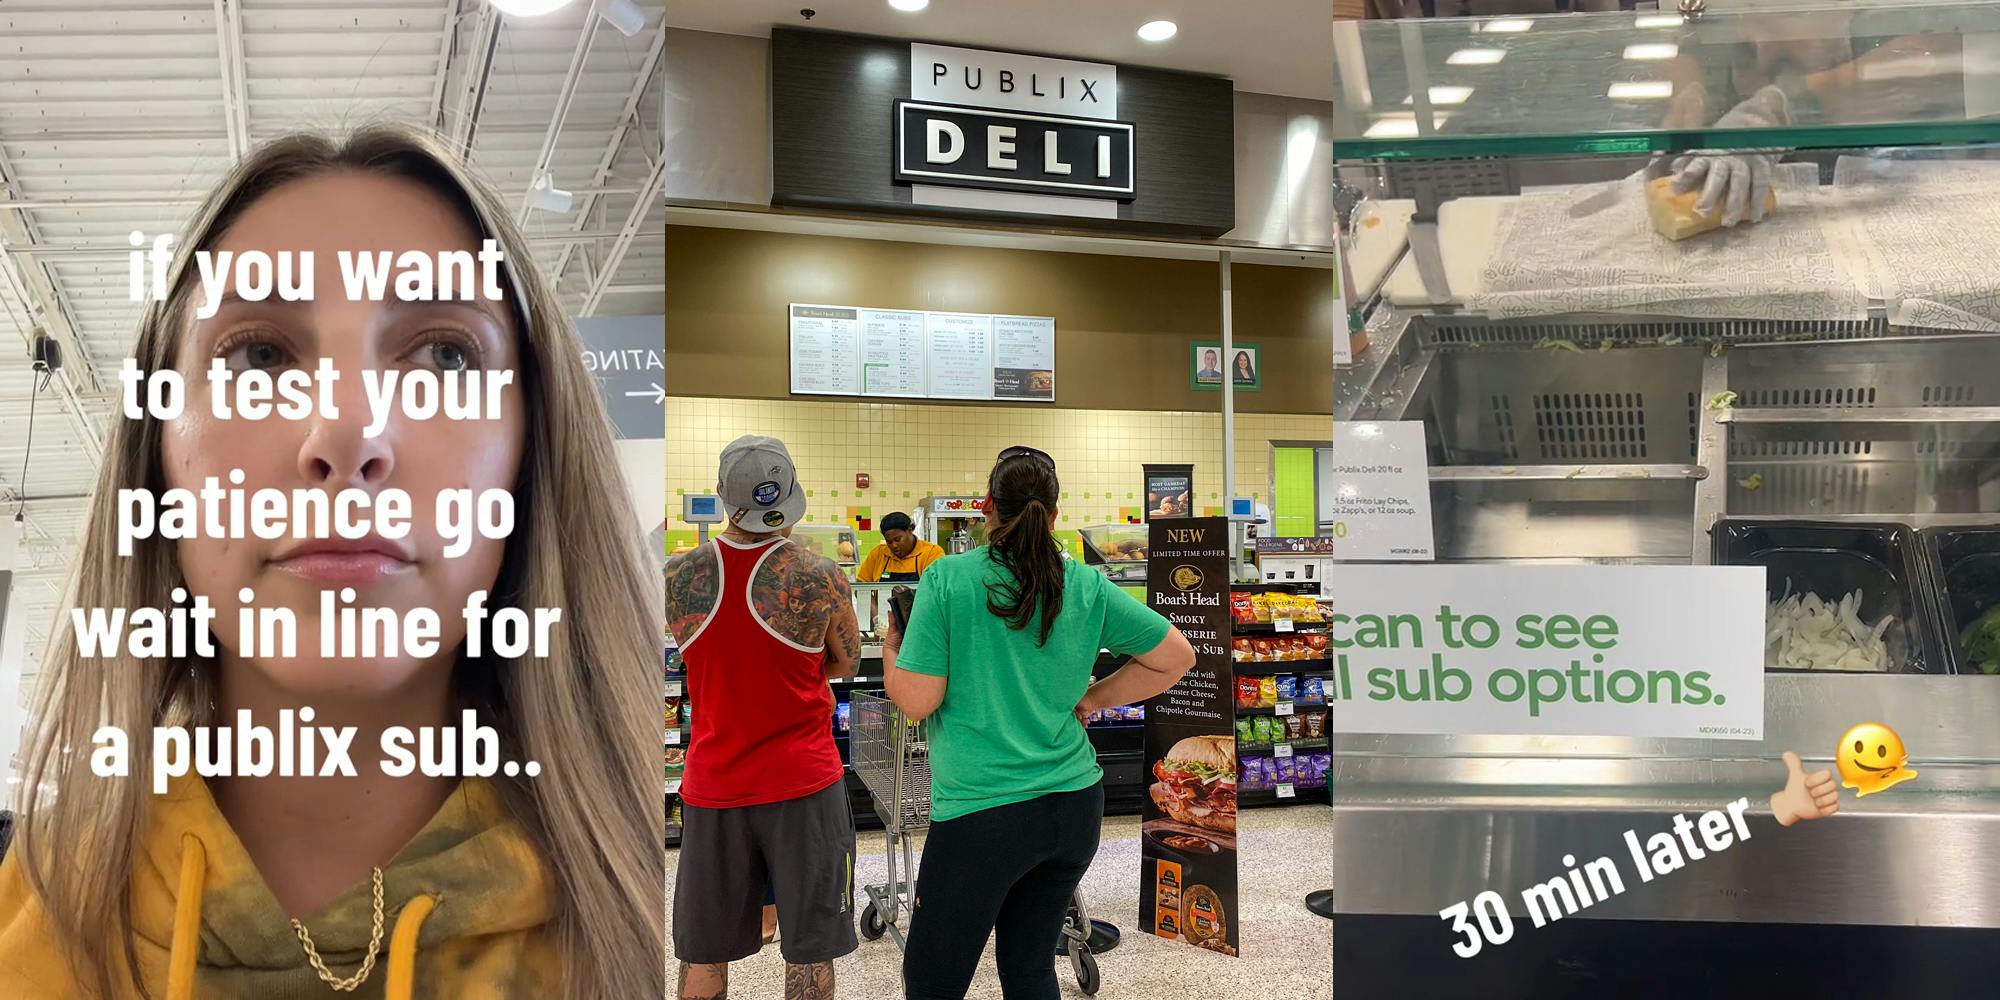 Publix customer with caption "if you want to test your patience go to wait in line for a publix sub" (l) Publix Deli line (c) Publix deli worker making sub with caption "30 min later" (r)